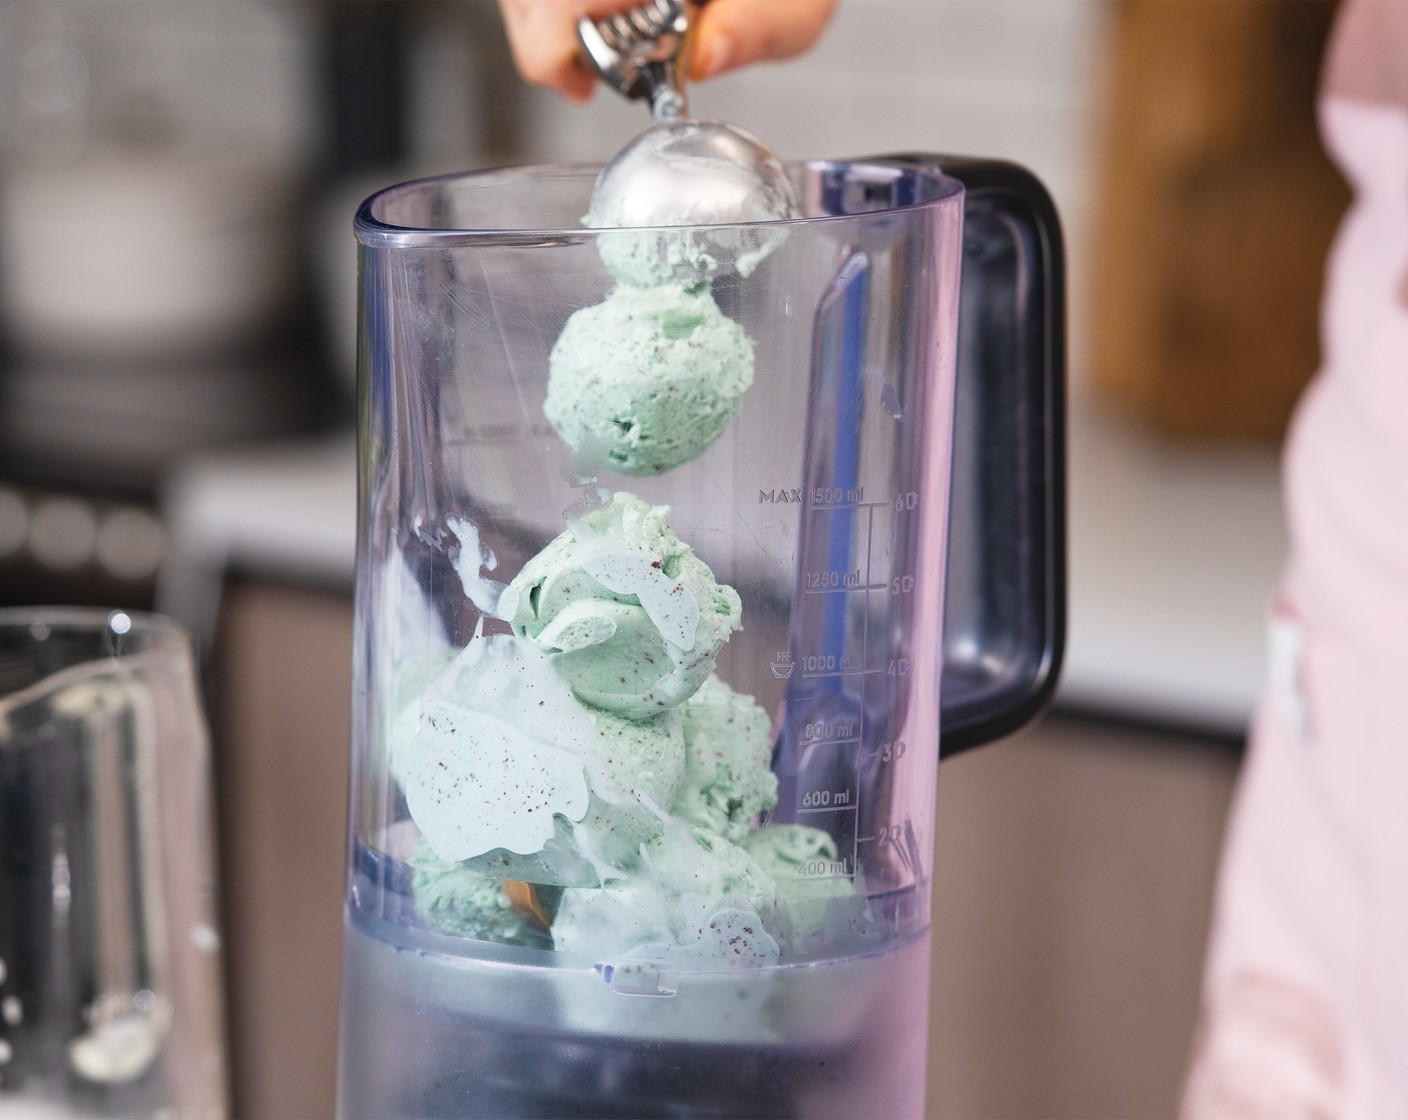 step 1 Into a blender, add Mint Chocolate Chip Ice Cream (2 cups), Milk (1 1/2 cups), Salt (1/4 tsp), and Vanilla Extract (1/4 tsp). Blend until smooth.